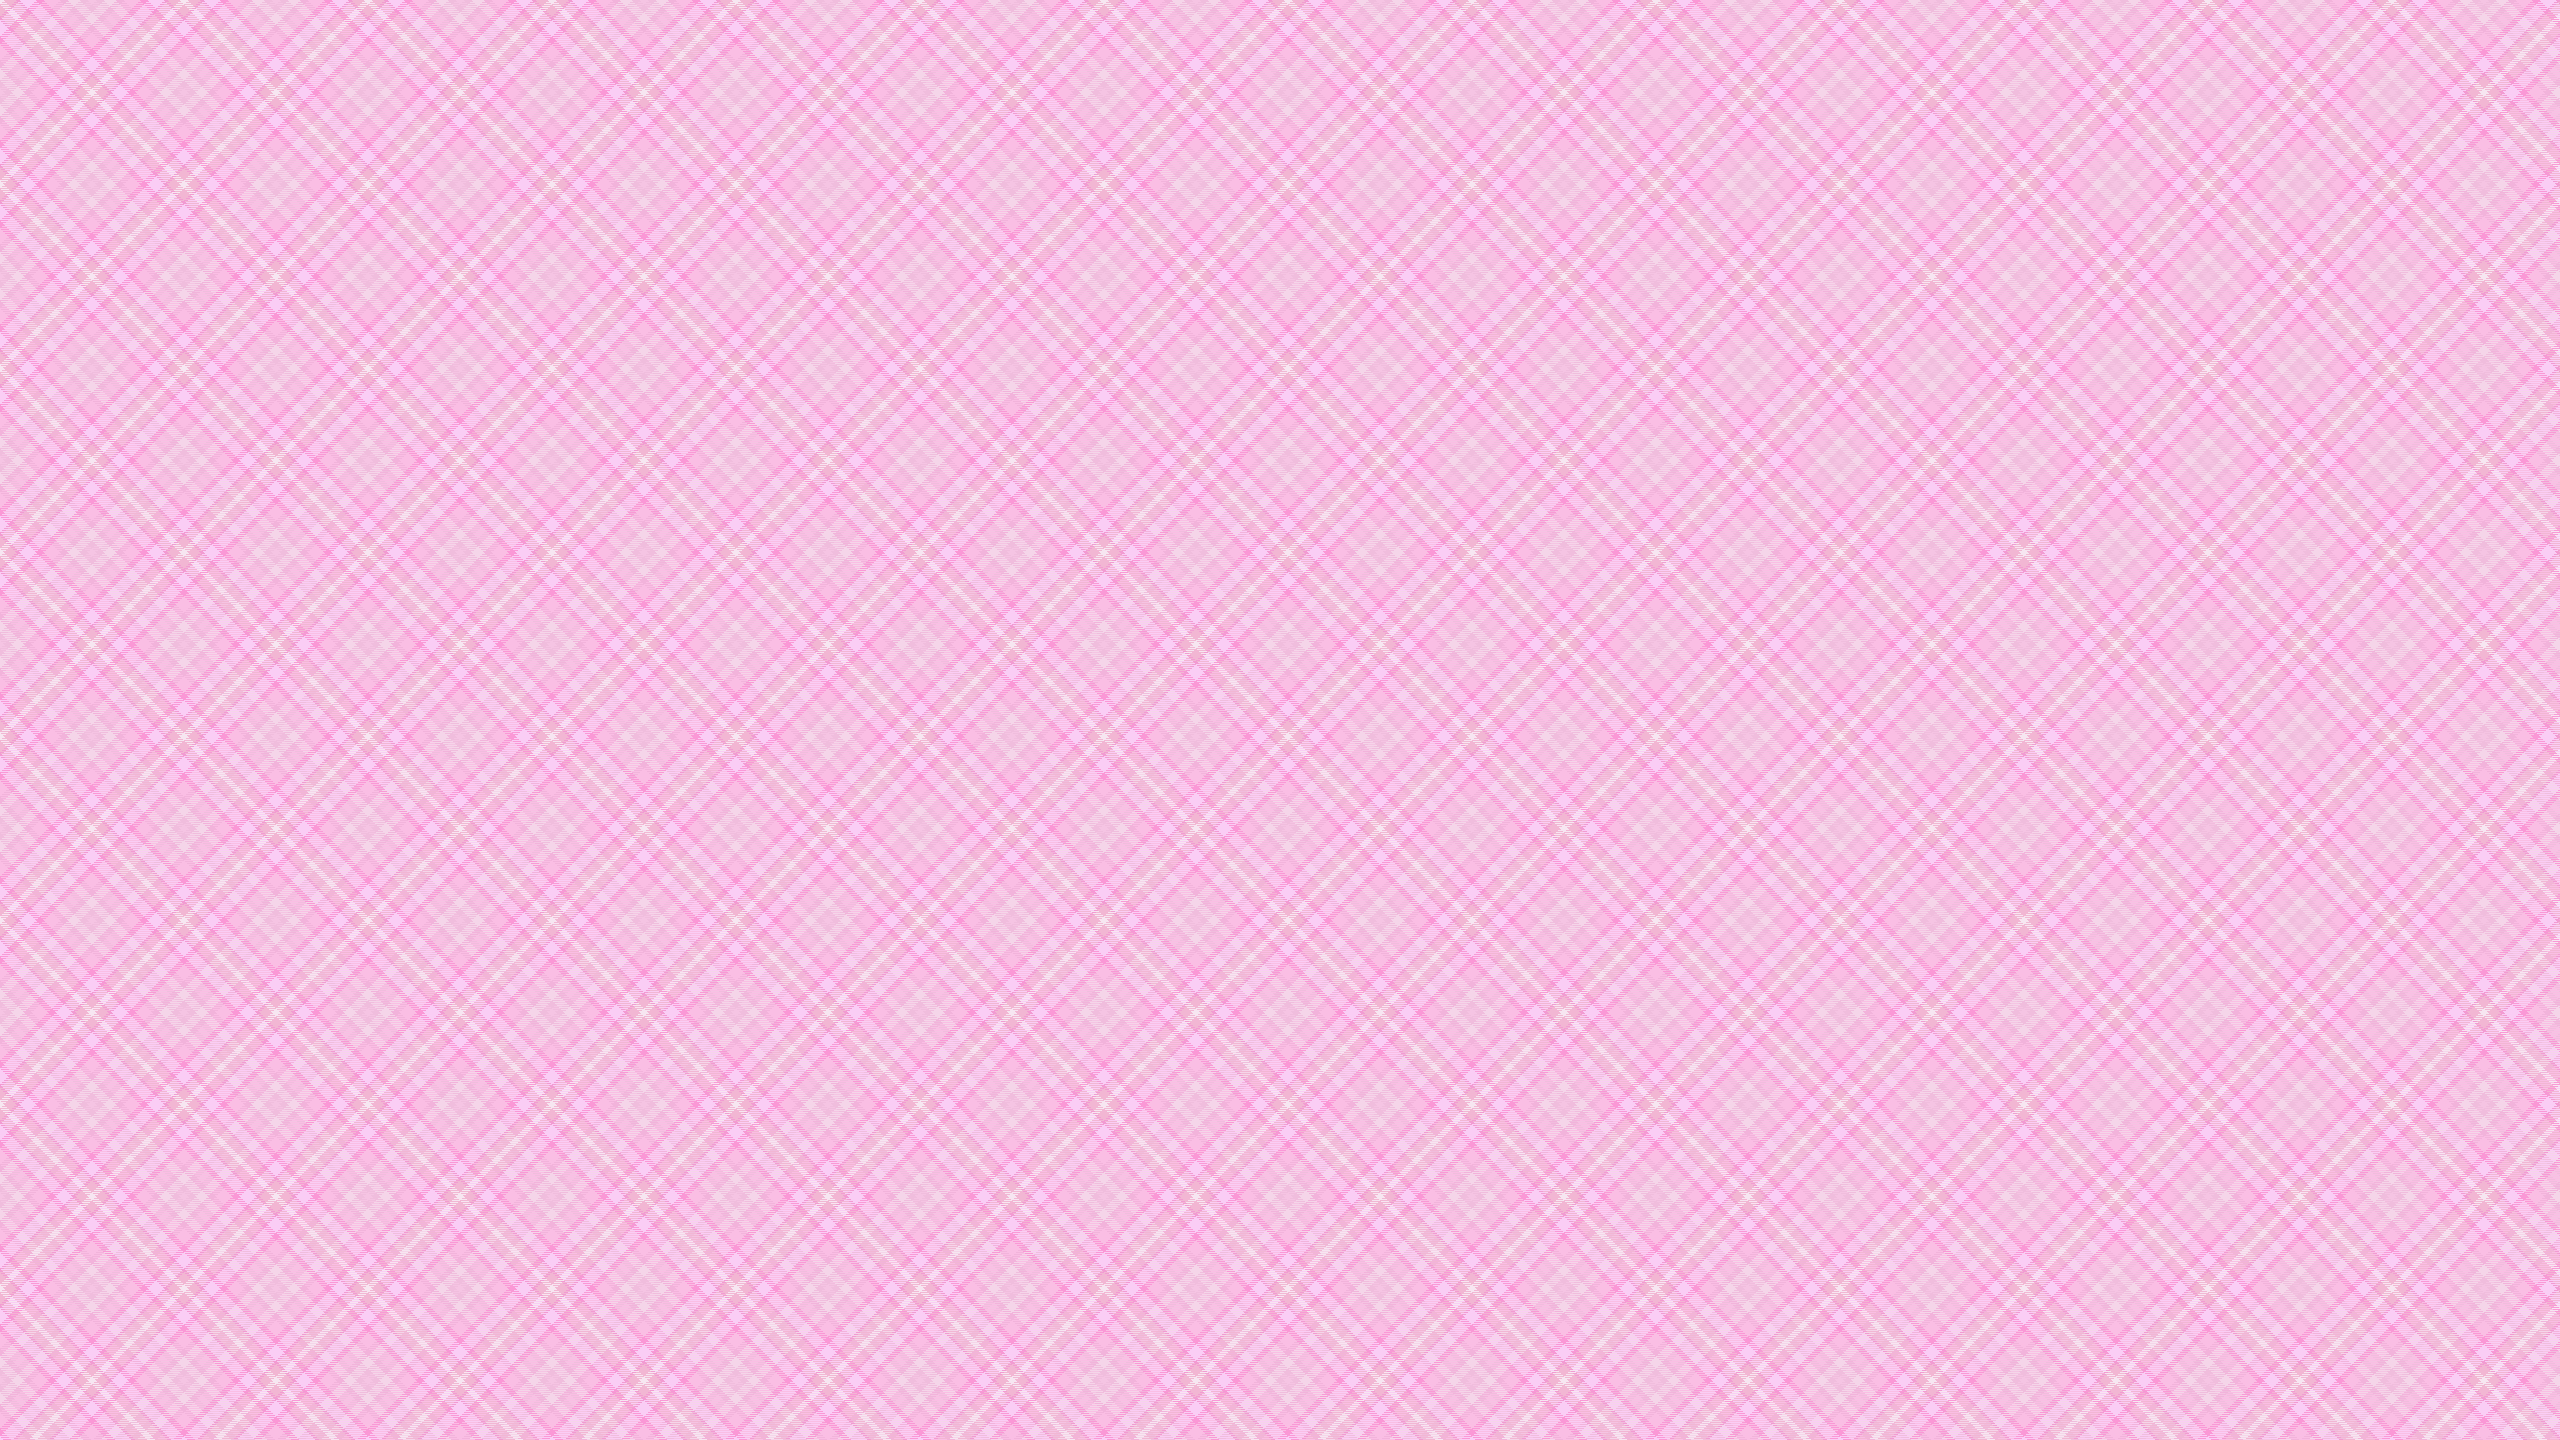 This Pink Ribbon Desktop Wallpaper Is Easy Just Save The